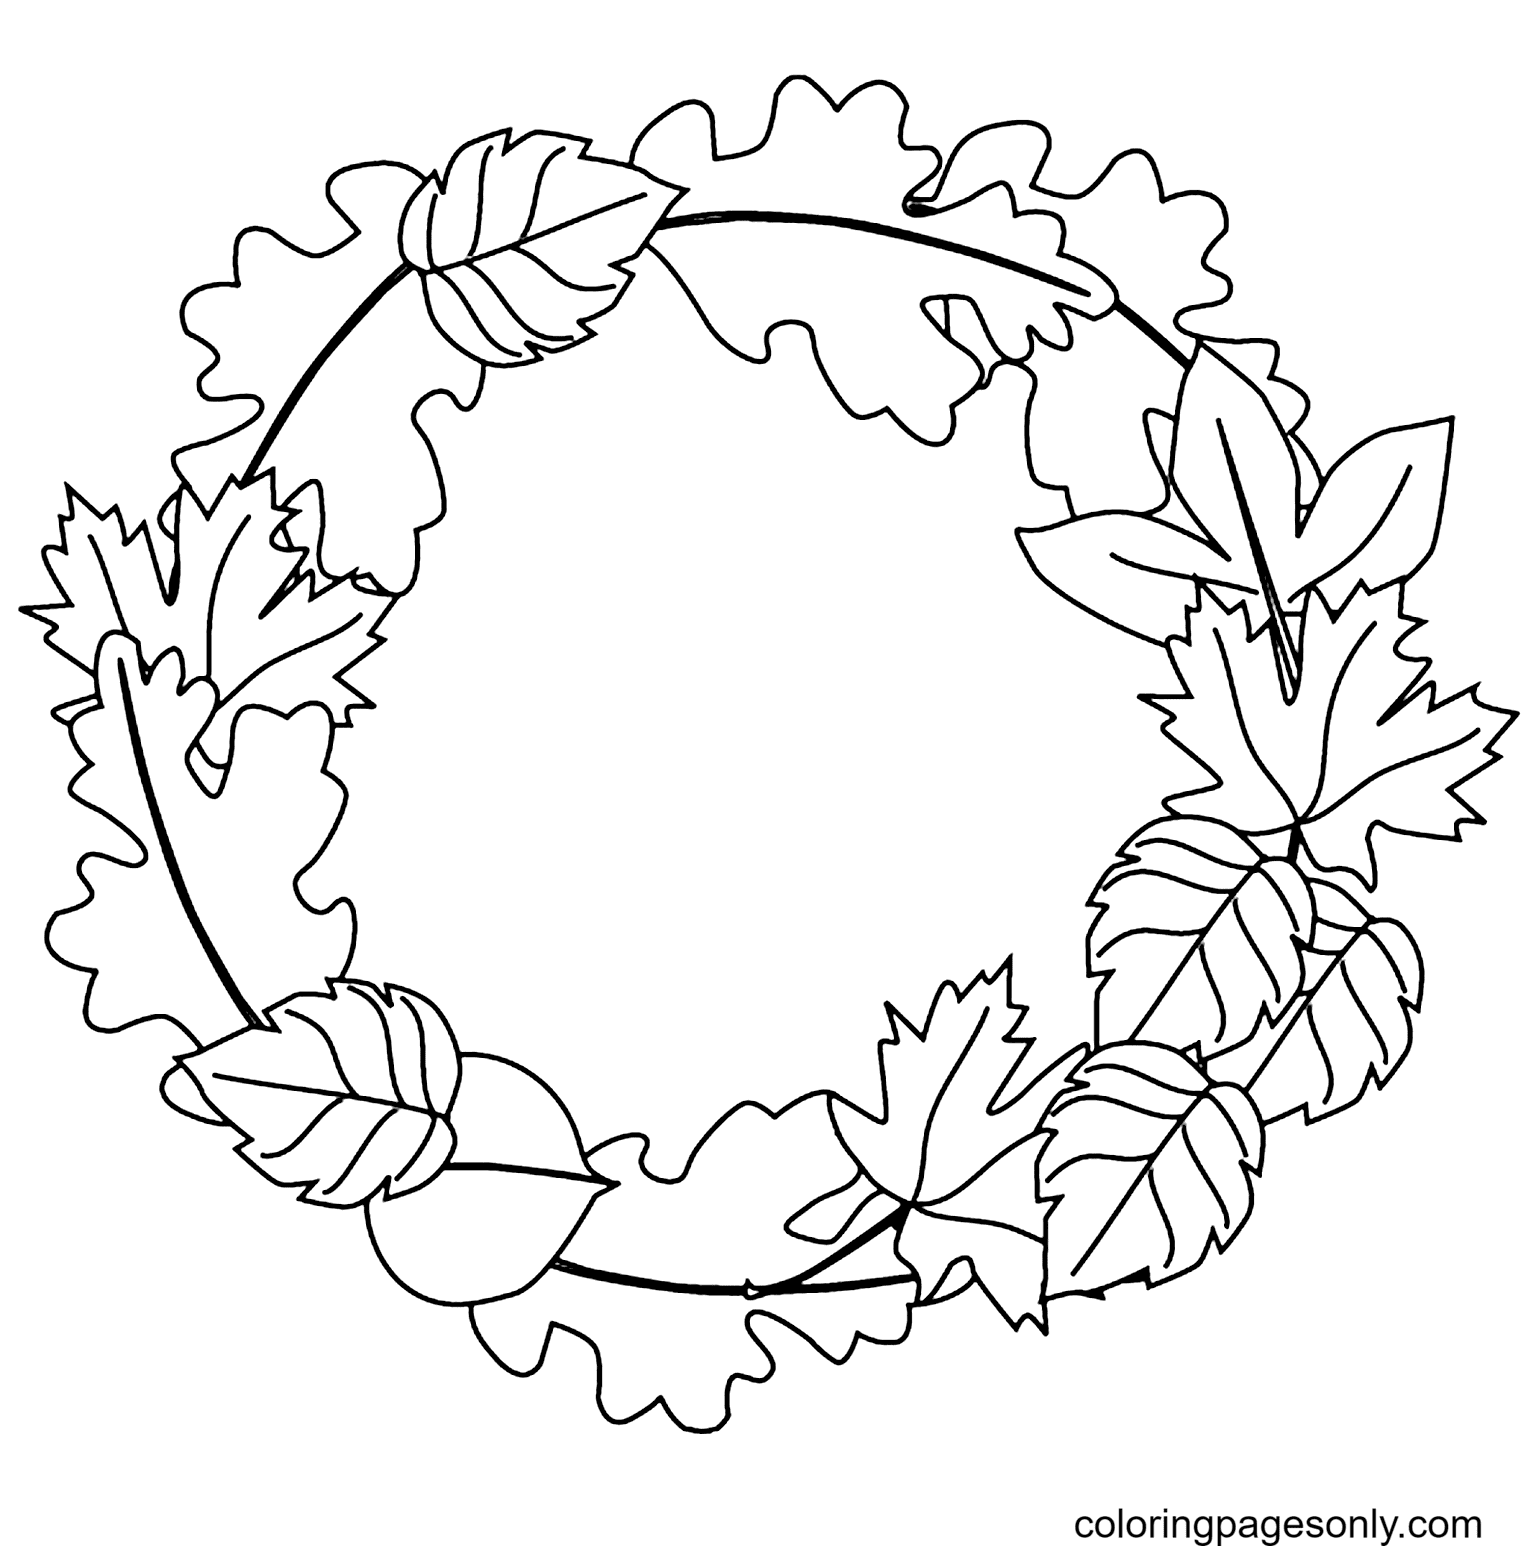 Fall Leaves Arrangement Coloring Pages